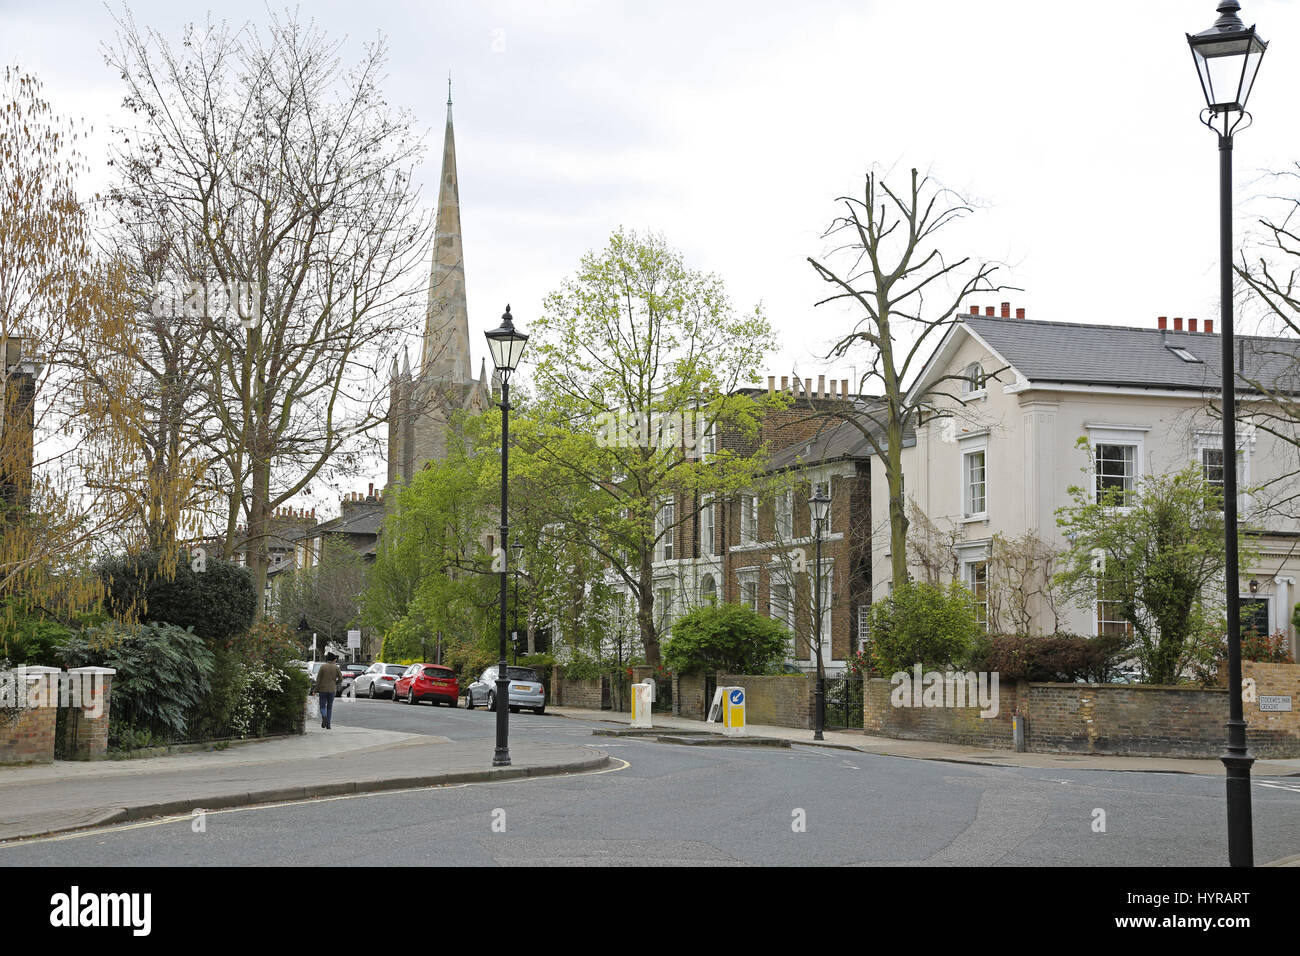 Houses and church on Stockwell Park Road, a famously elegant street in the increasingly popular inner city area of Stockwell in South London, UK Stock Photo